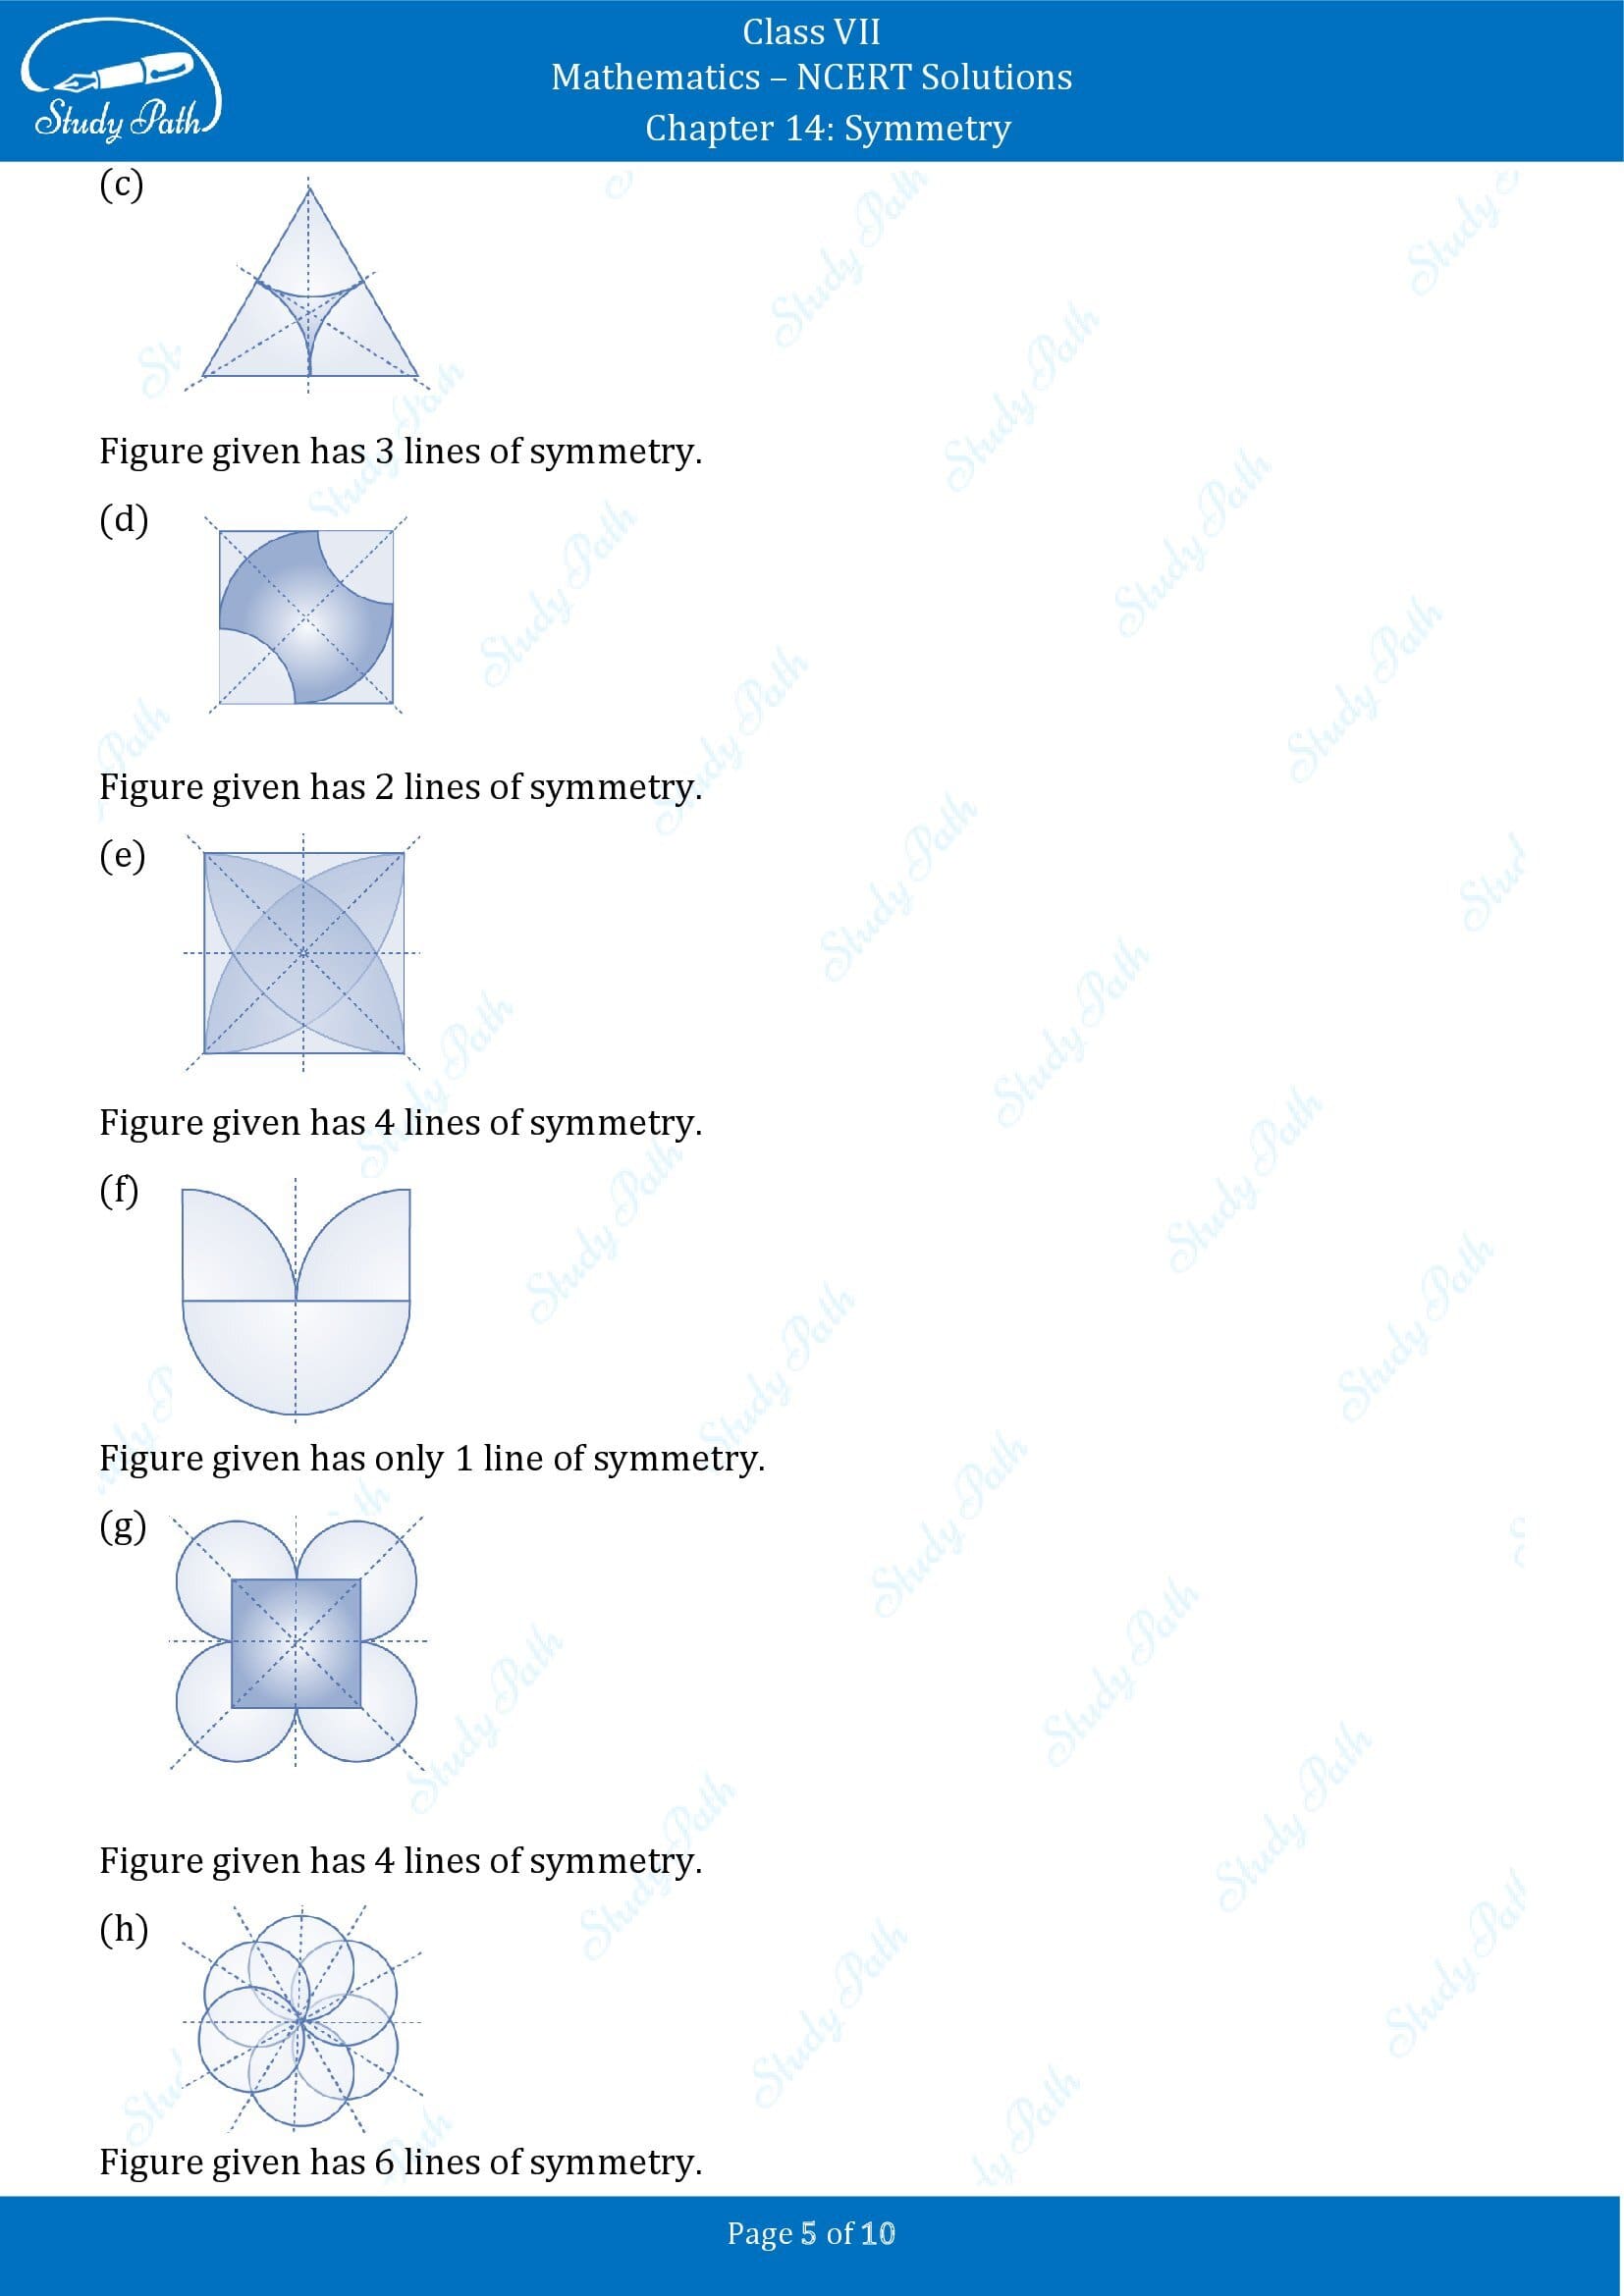 NCERT Solutions for Class 7 Maths Chapter 14 Symmetry Exercise 14.1 00005